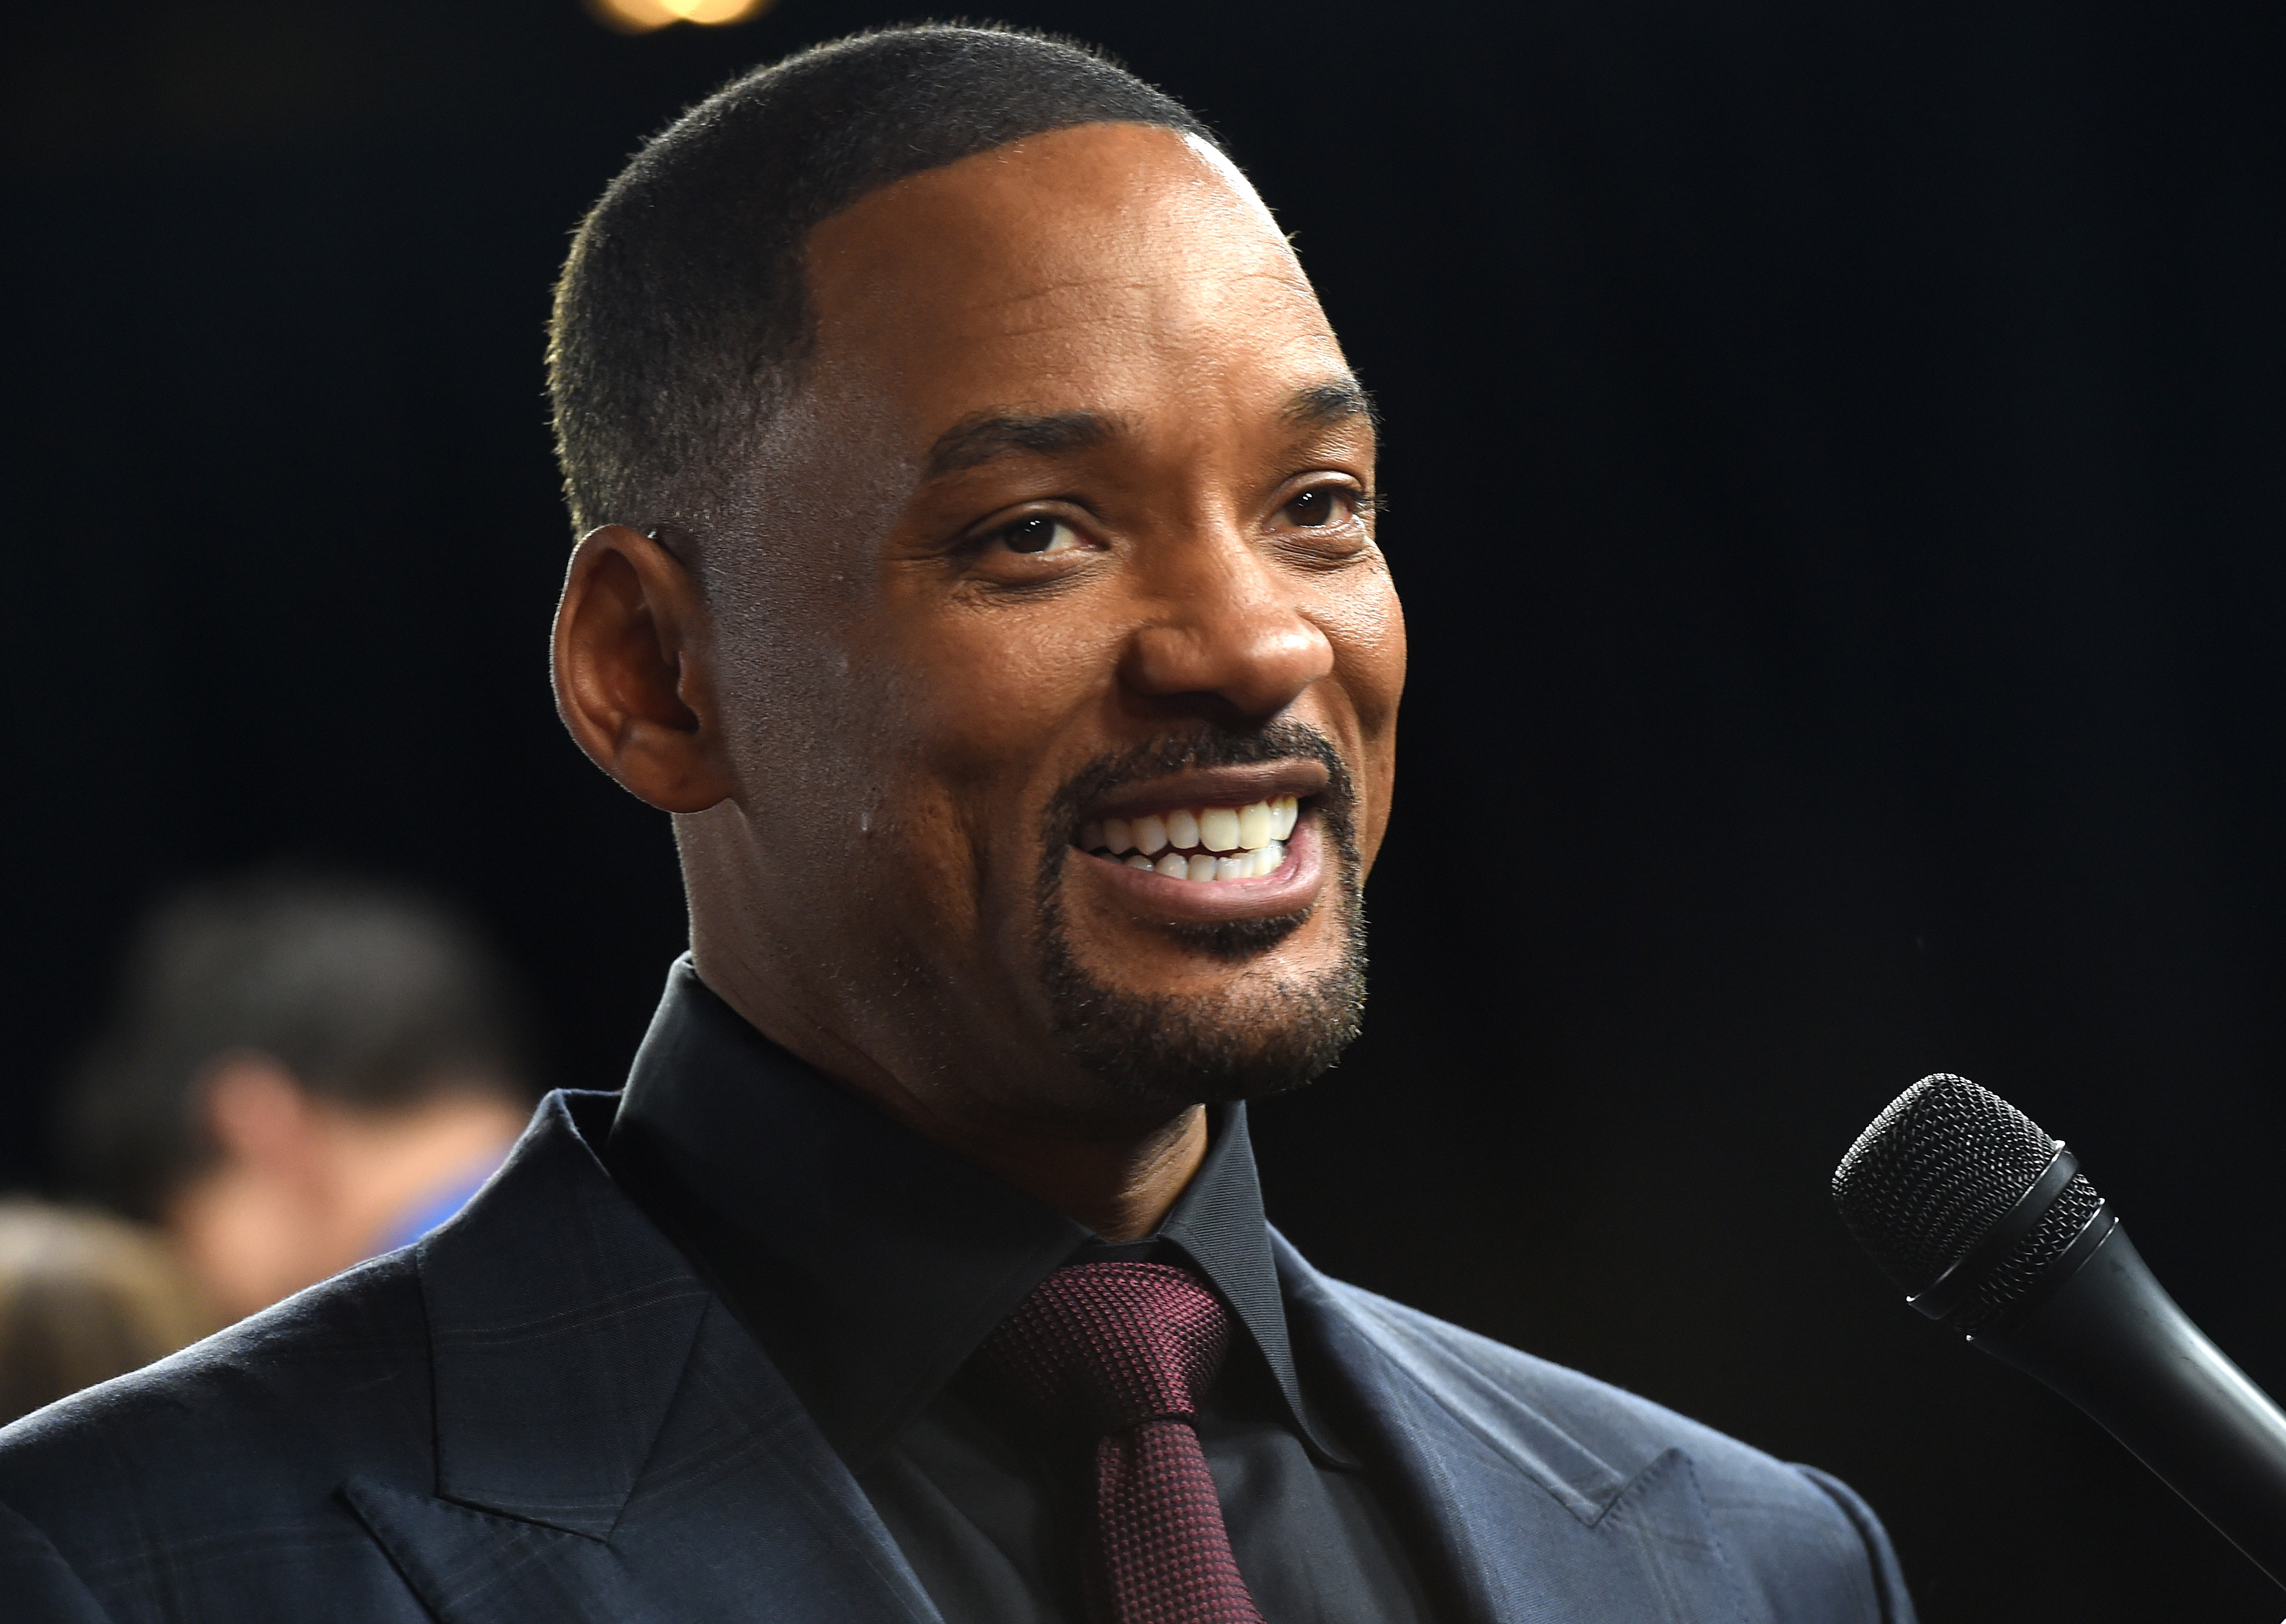 Will Smith Shirtless Fighting Moves For Focus Photo 2951731   Shirtless Will Smith Photos  Just Jared Entertainment News